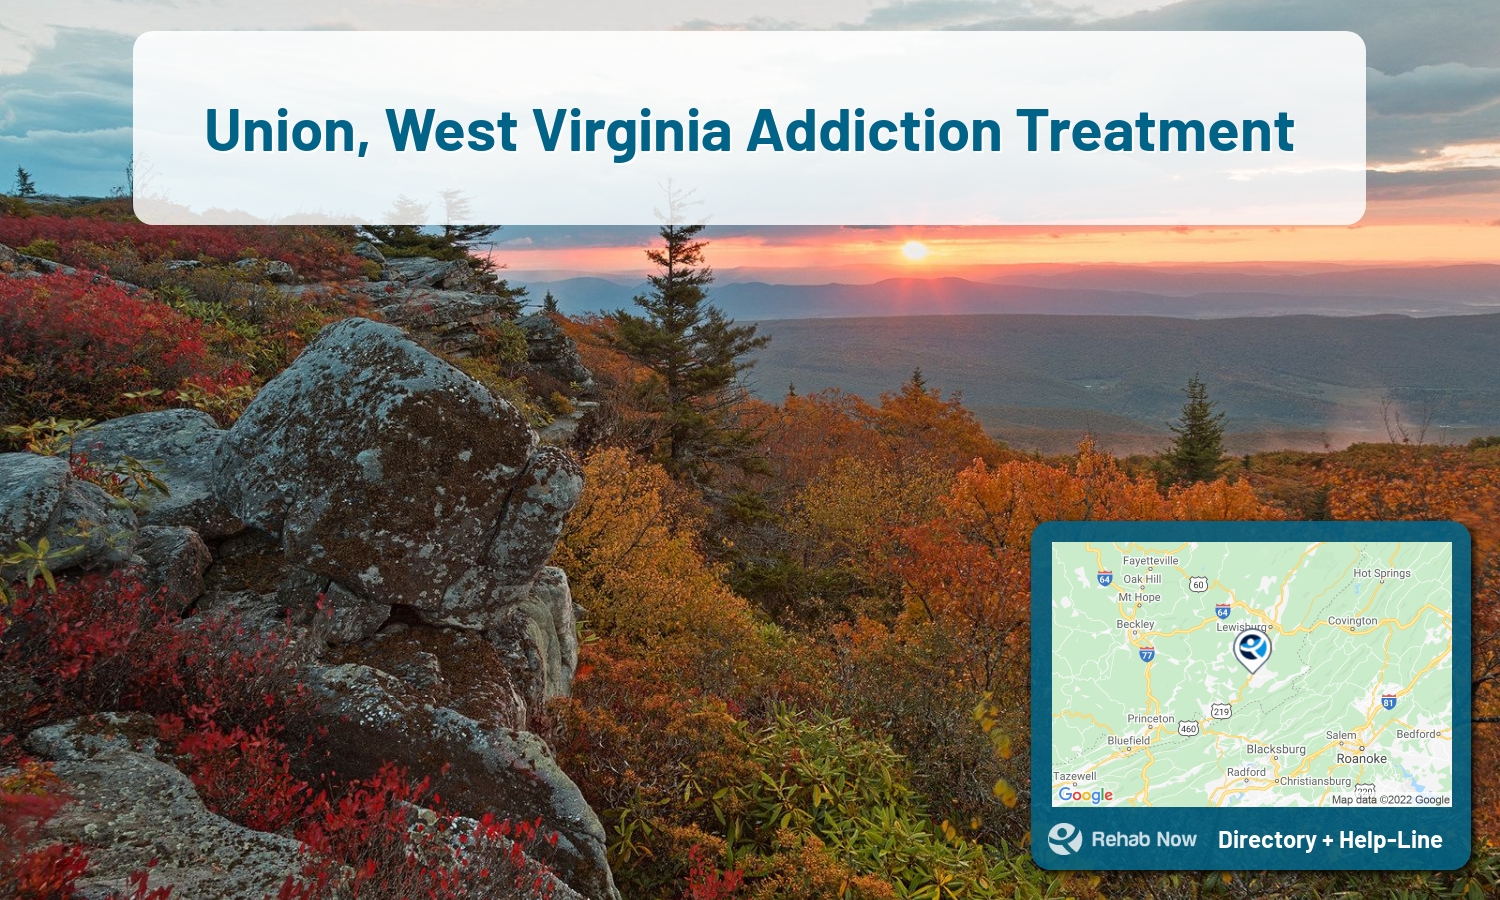 View options, availability, treatment methods, and more, for drug rehab and alcohol treatment in Union, West Virginia